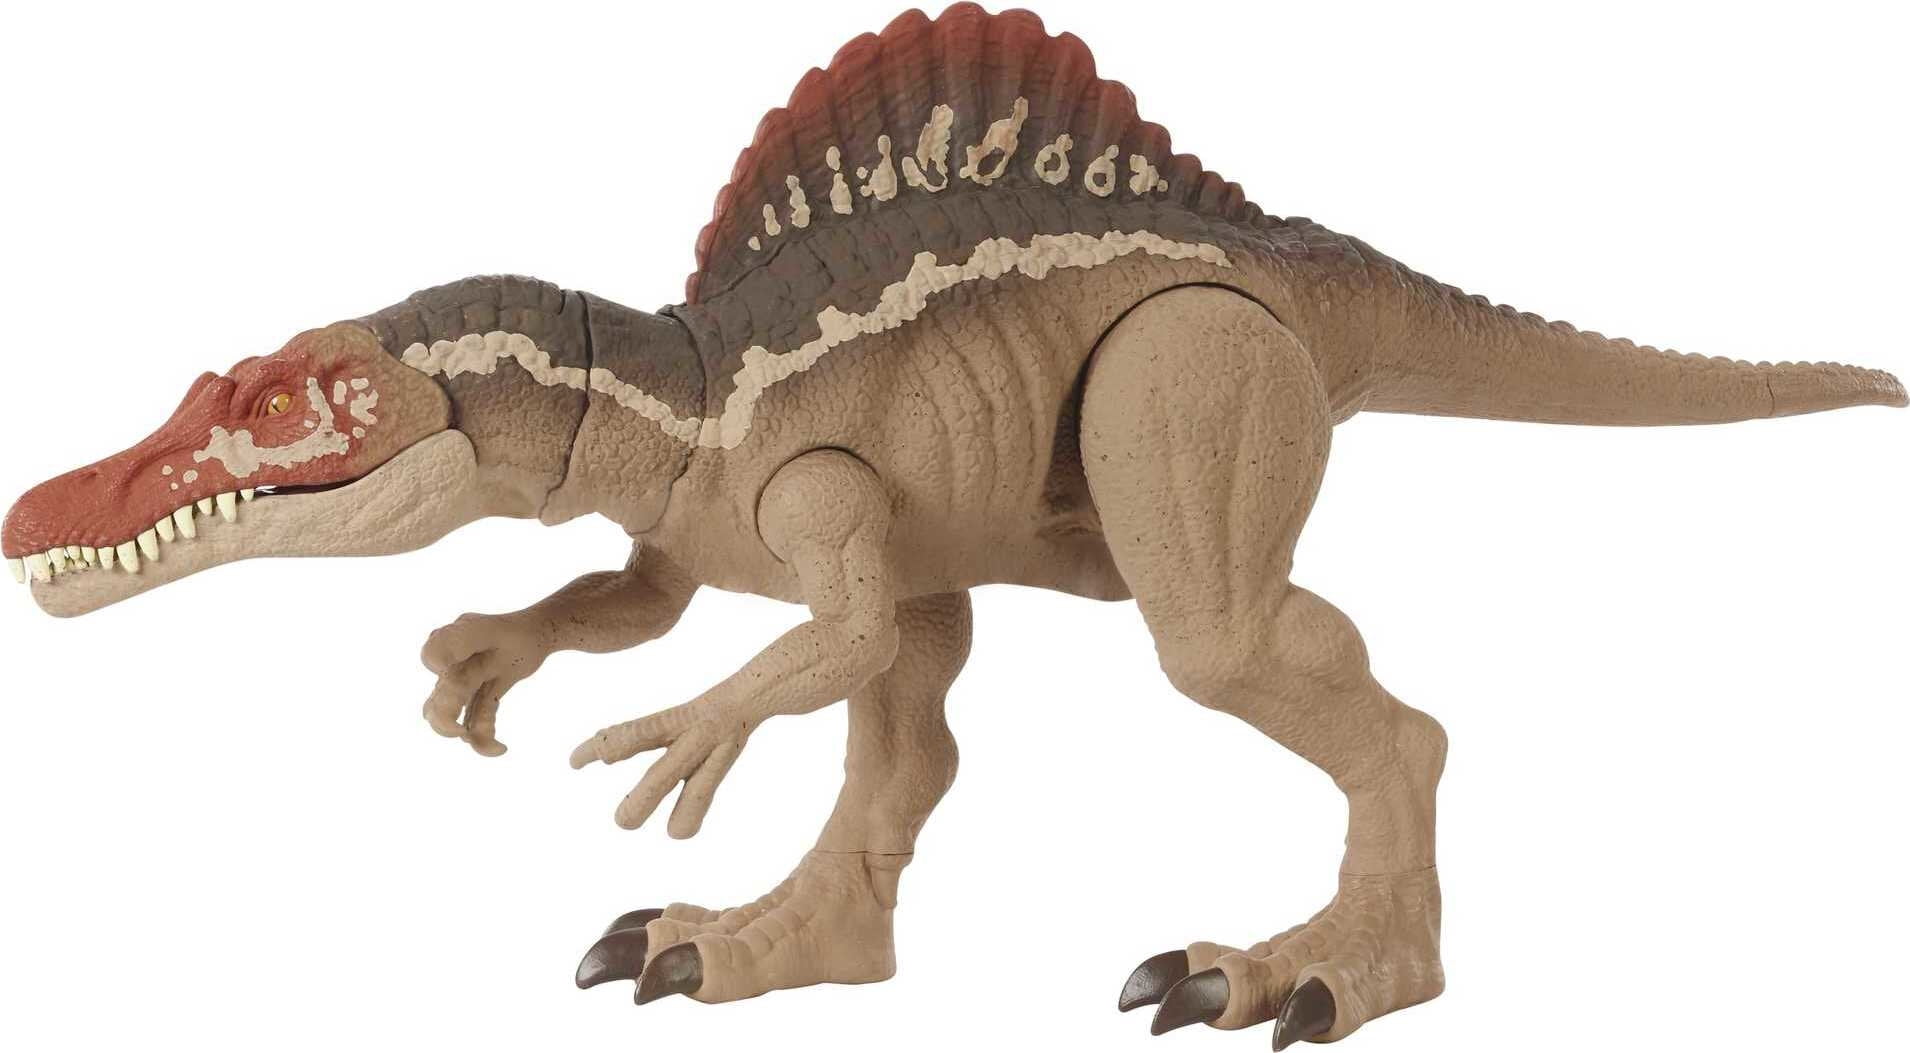 Large Movable Jaw Spinosaurus Dinosaur Figure Toy Model Best Christmas Kids Gift 